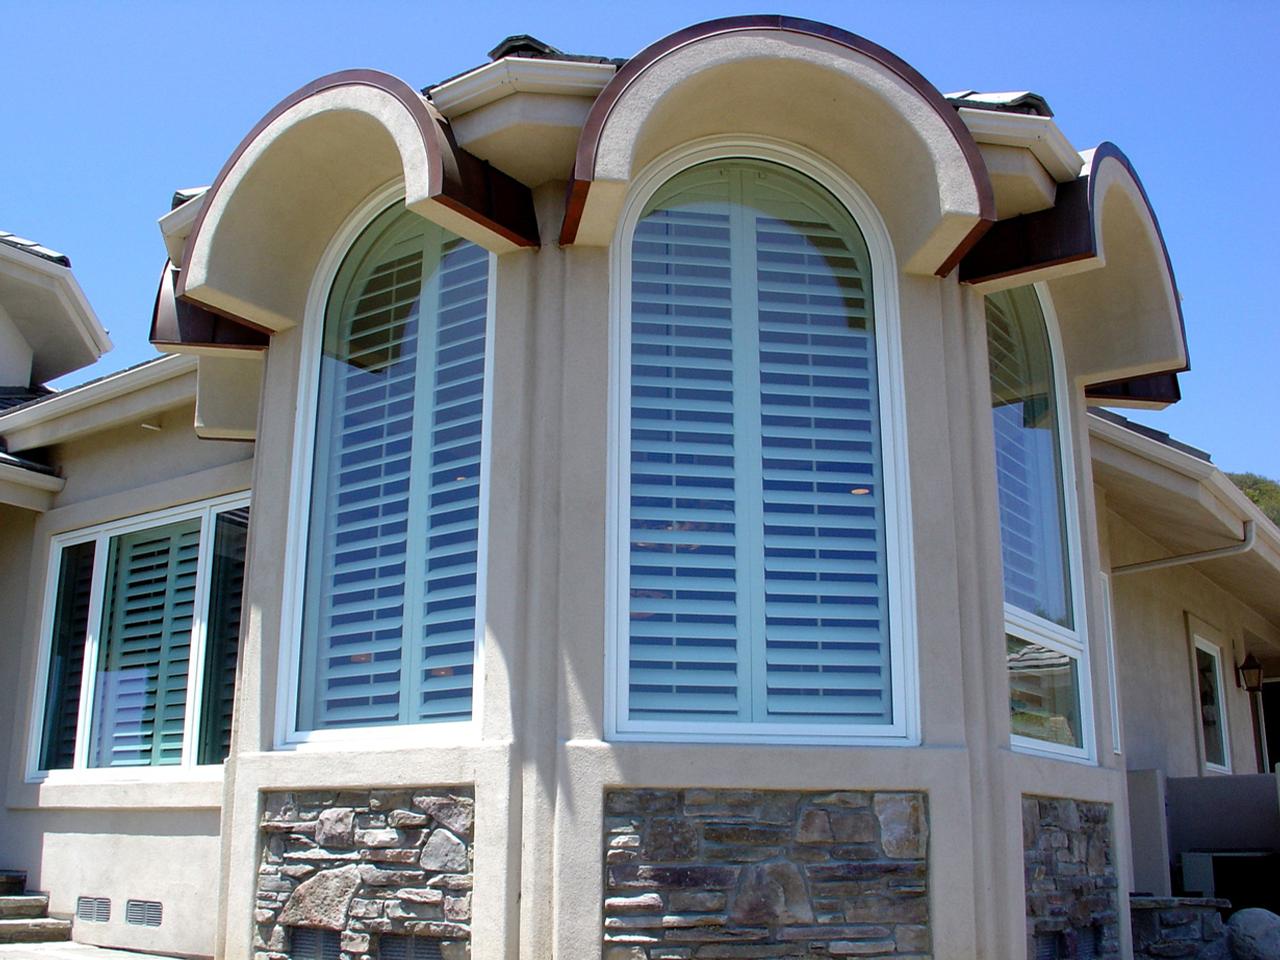 Outside view of arched windows with interior shutters